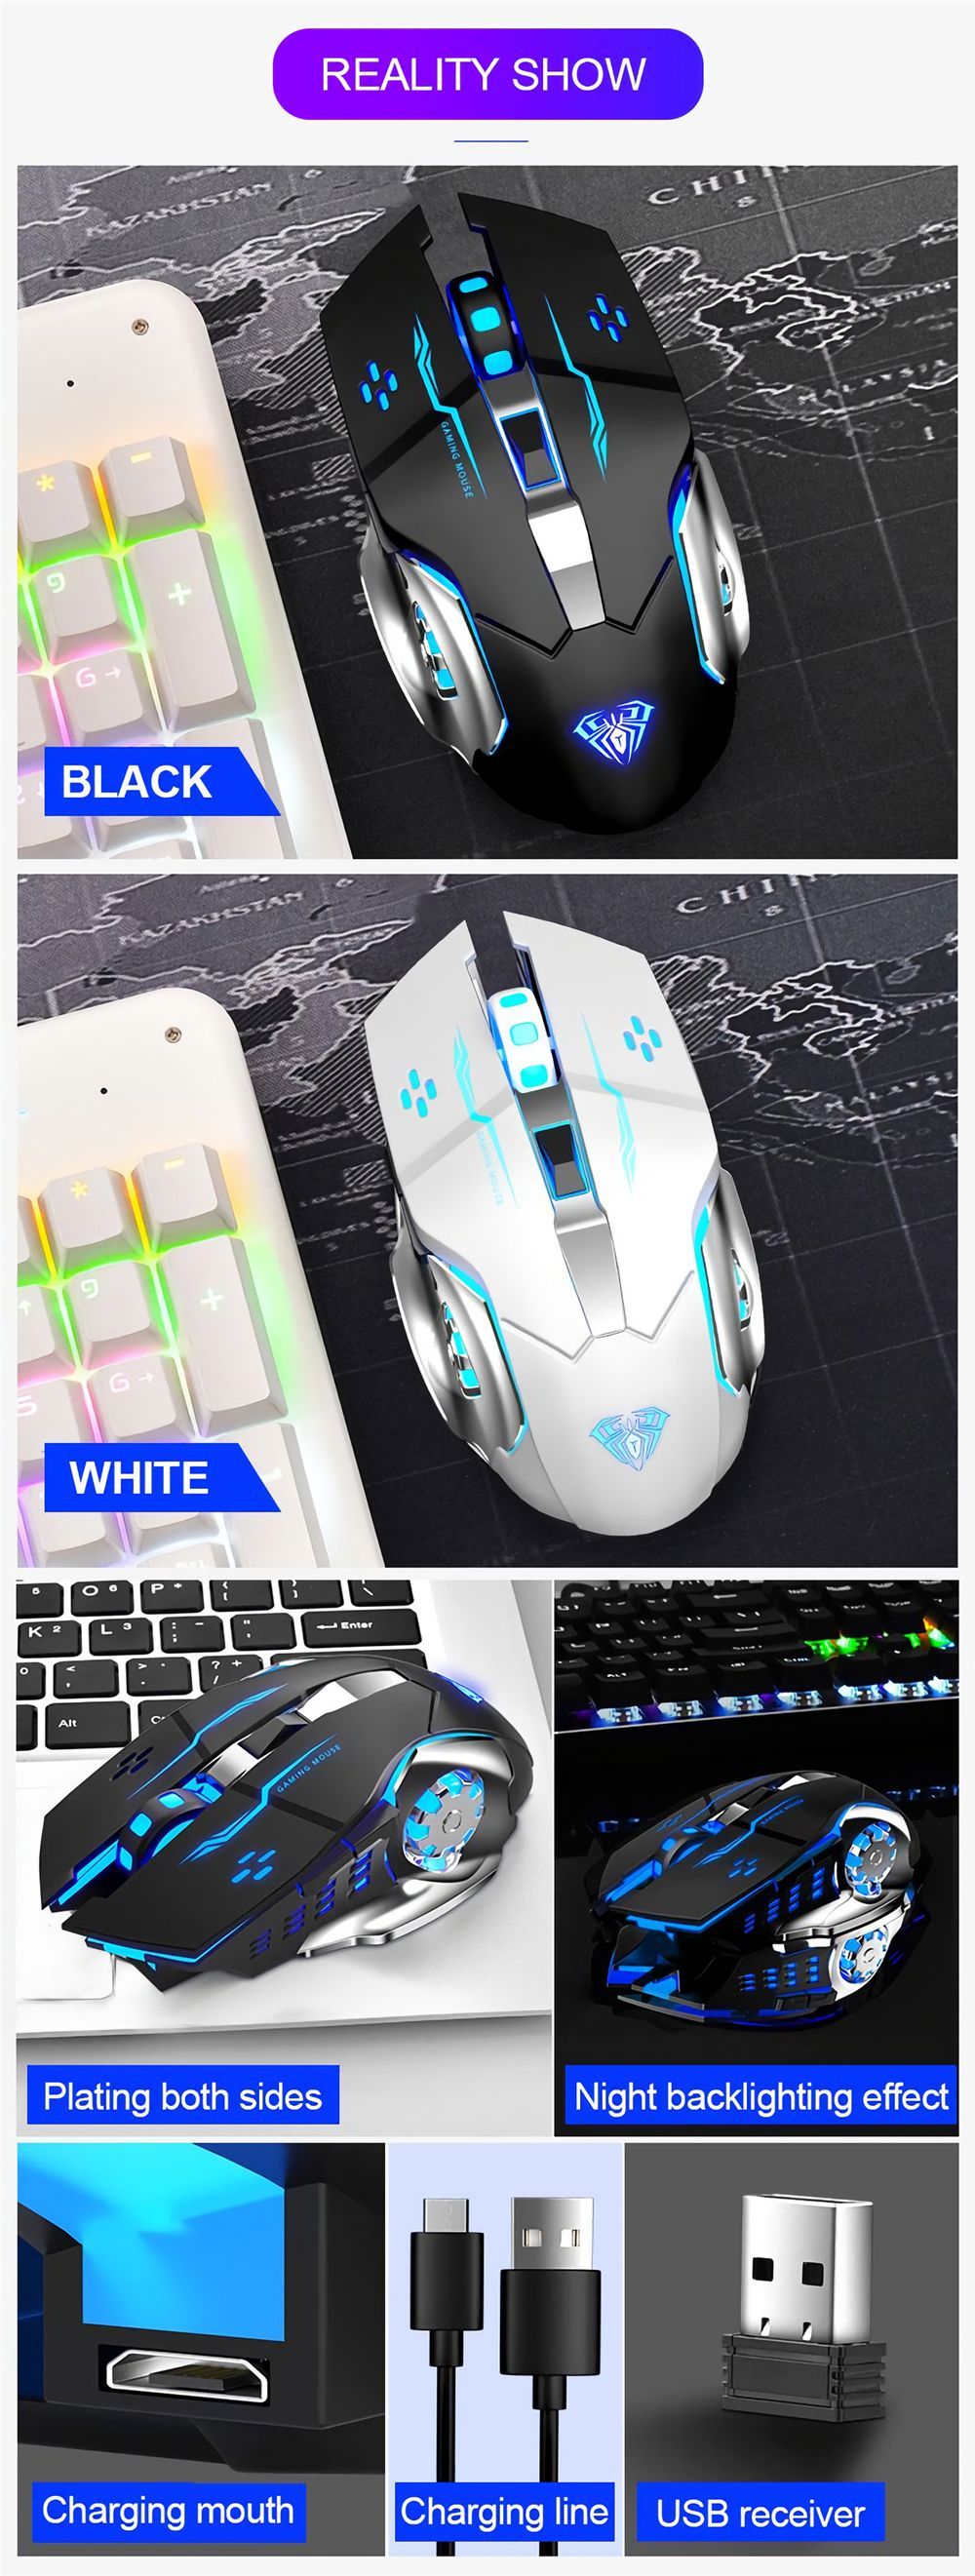 AULA-SC100-24GHz-Wireless-Mouse-1600DPI-RGB-Backlit-Rechargeable-Gaming-Mouse-for-Computer-Laptop-PC-1717175